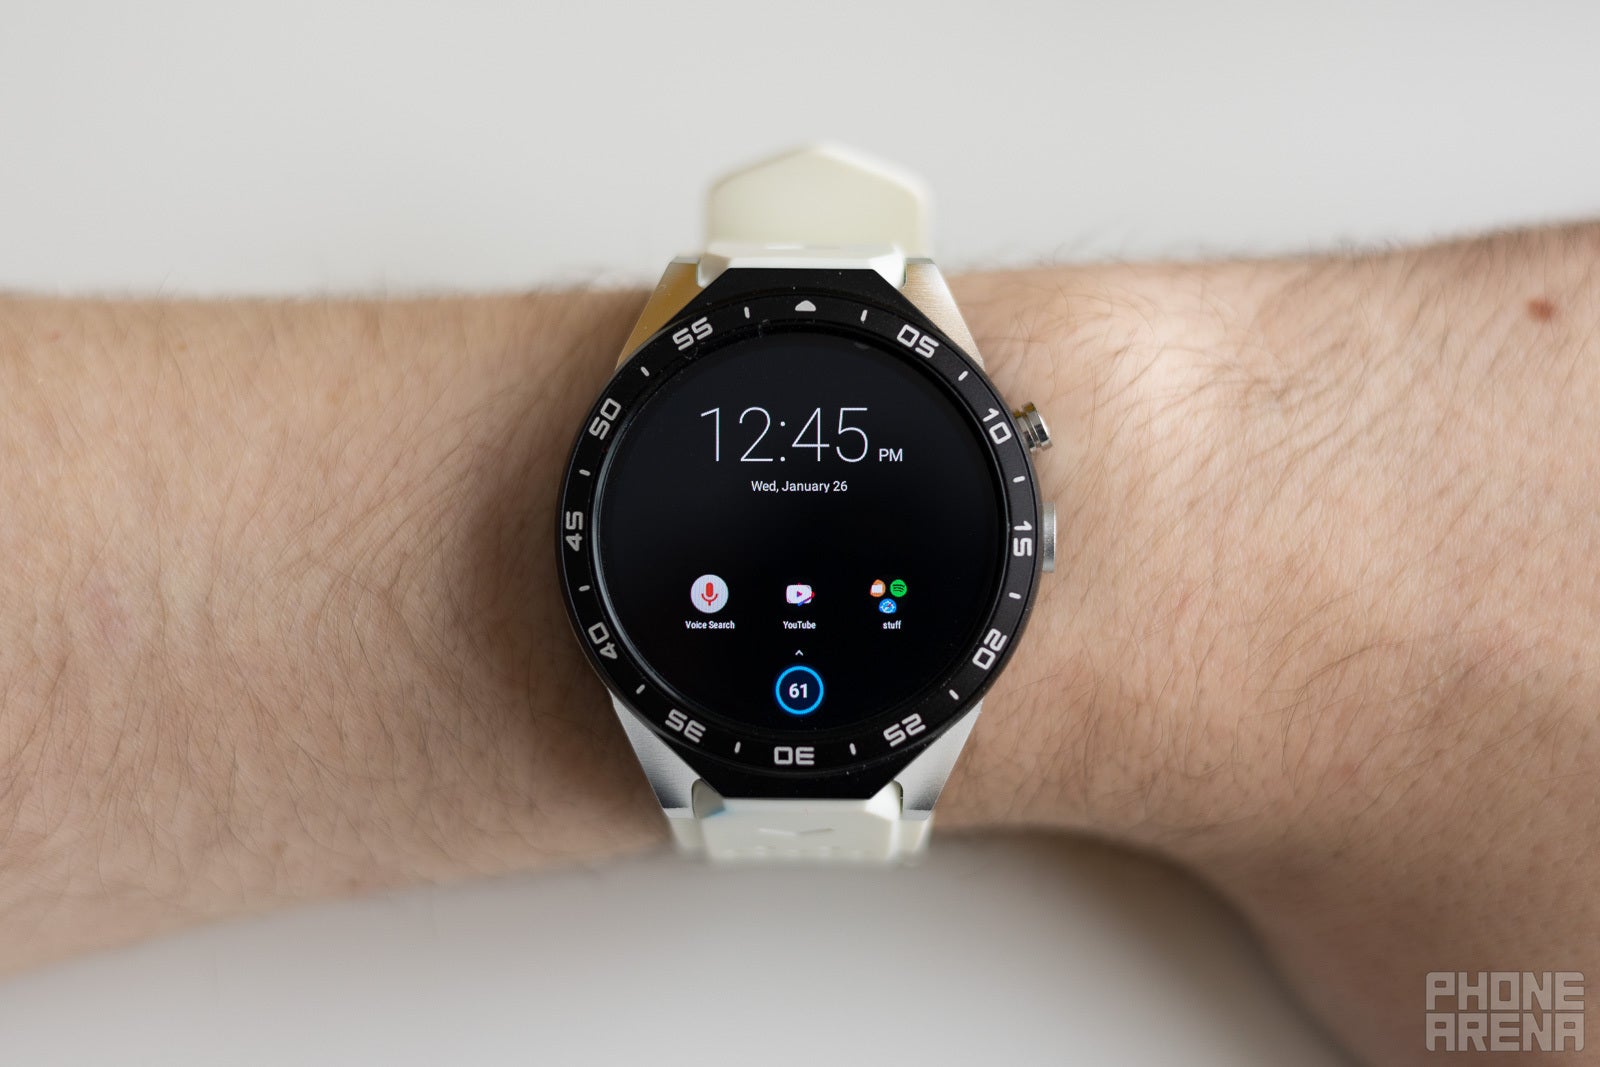 Full Android on a smartwatch: ridiculous or awesome? - PhoneArena